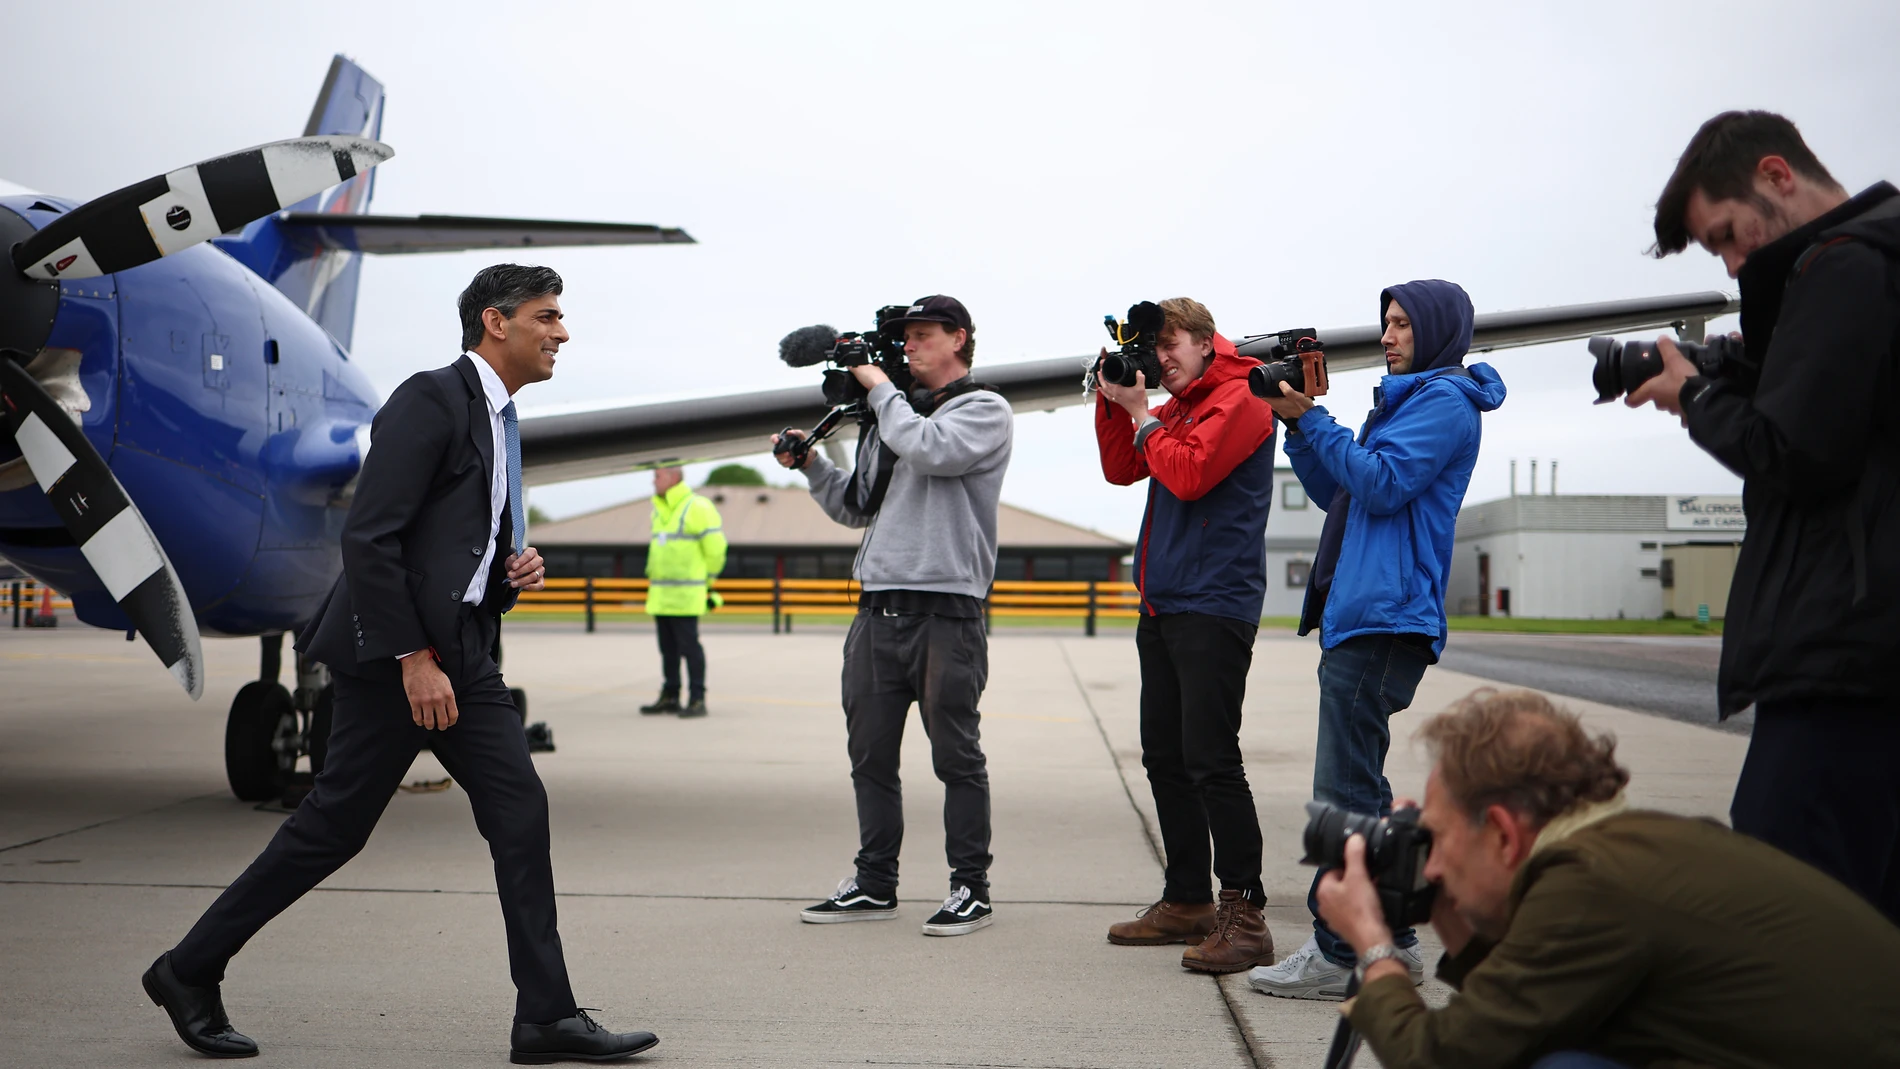 Britain's Prime Minister and Conservative Party leader Rishi Sunak disembarks a plane at Inverness Airport, ahead of a campaign event in the build-up to the UK general election on July 4, in north-east Scotland, Thursday, May 23, 2024 .(Henry Nicholls/Pool Photo via AP)